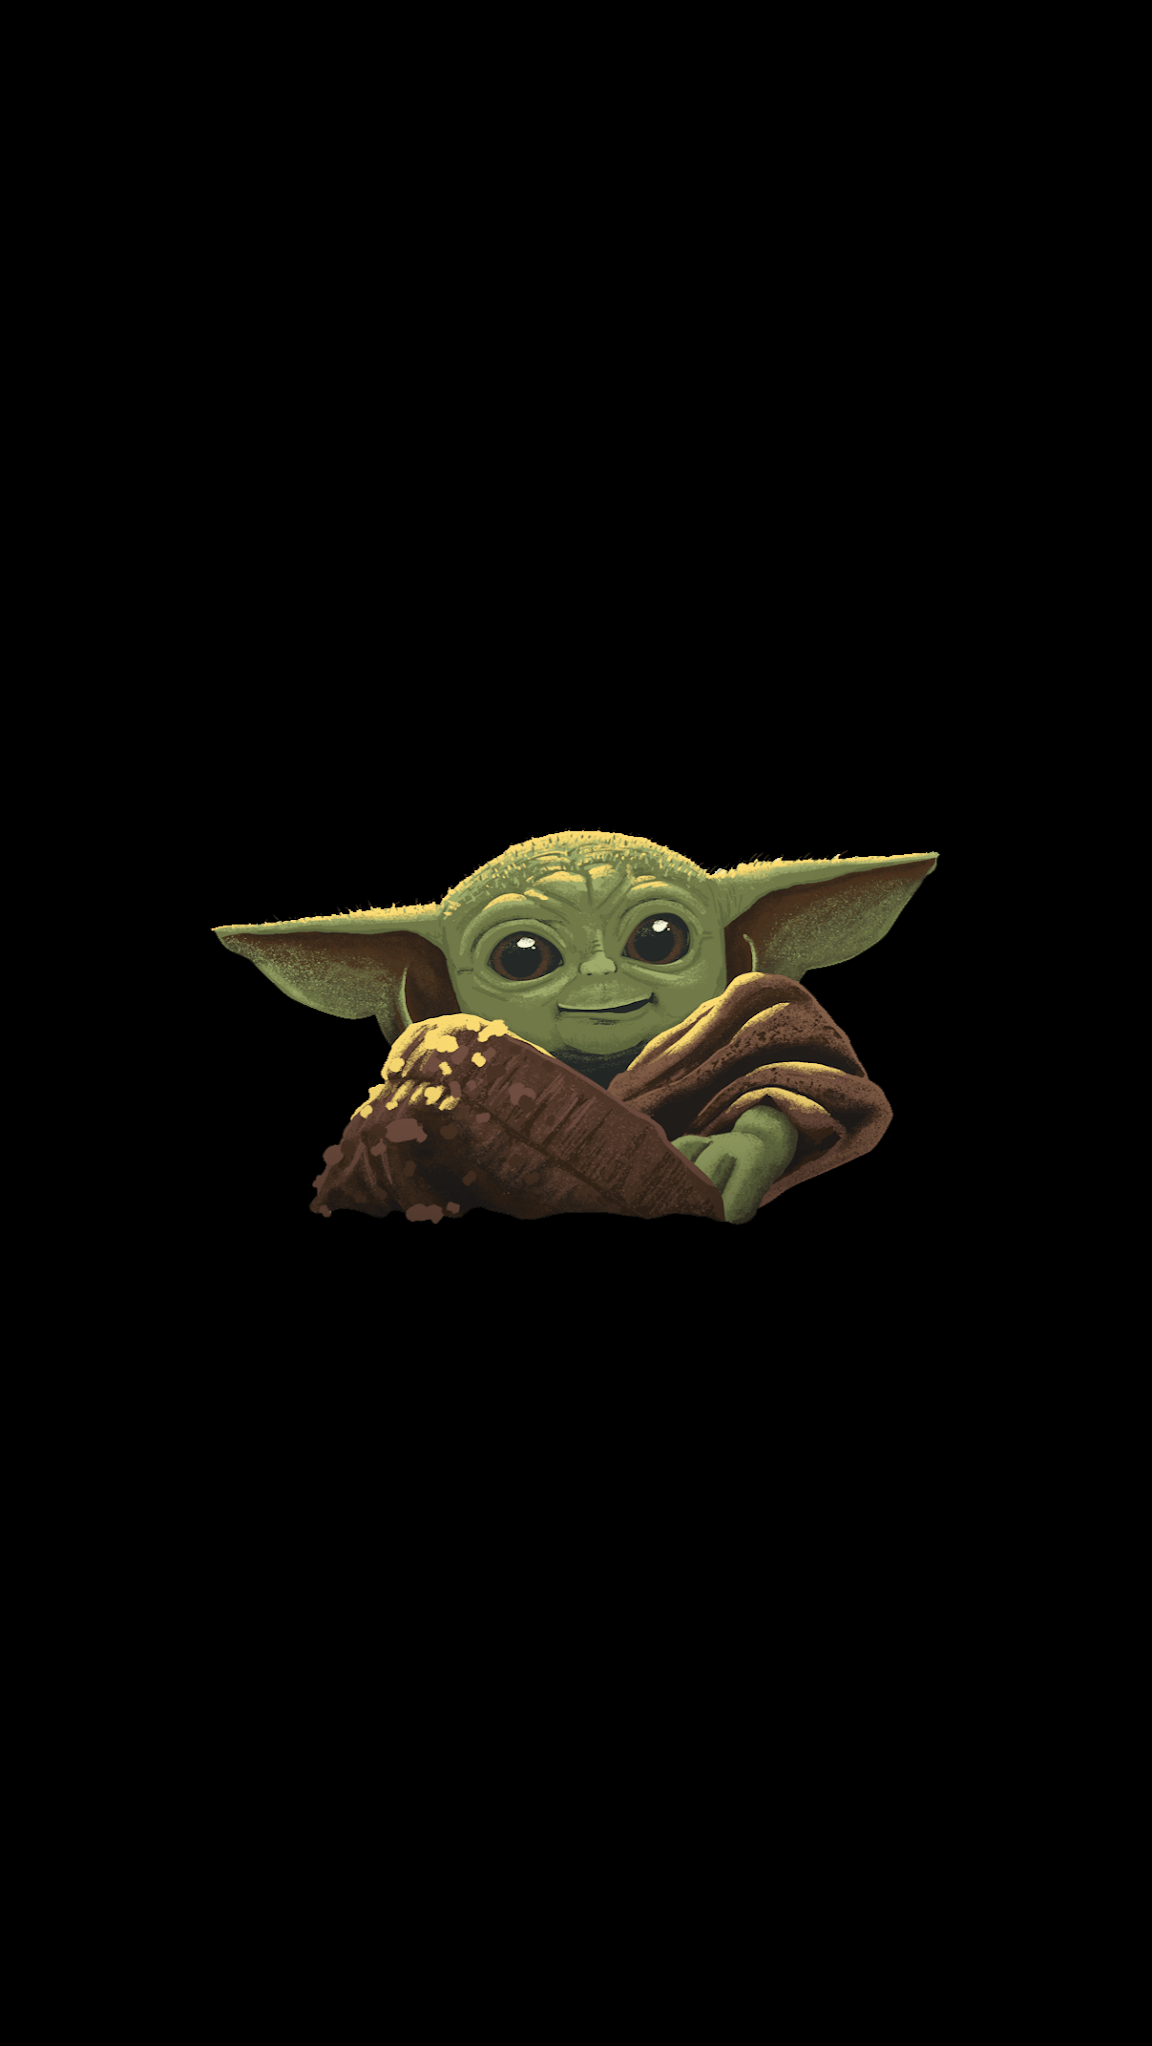 Aesthetic Baby Yoda Wallpapers Wallpaper Cave